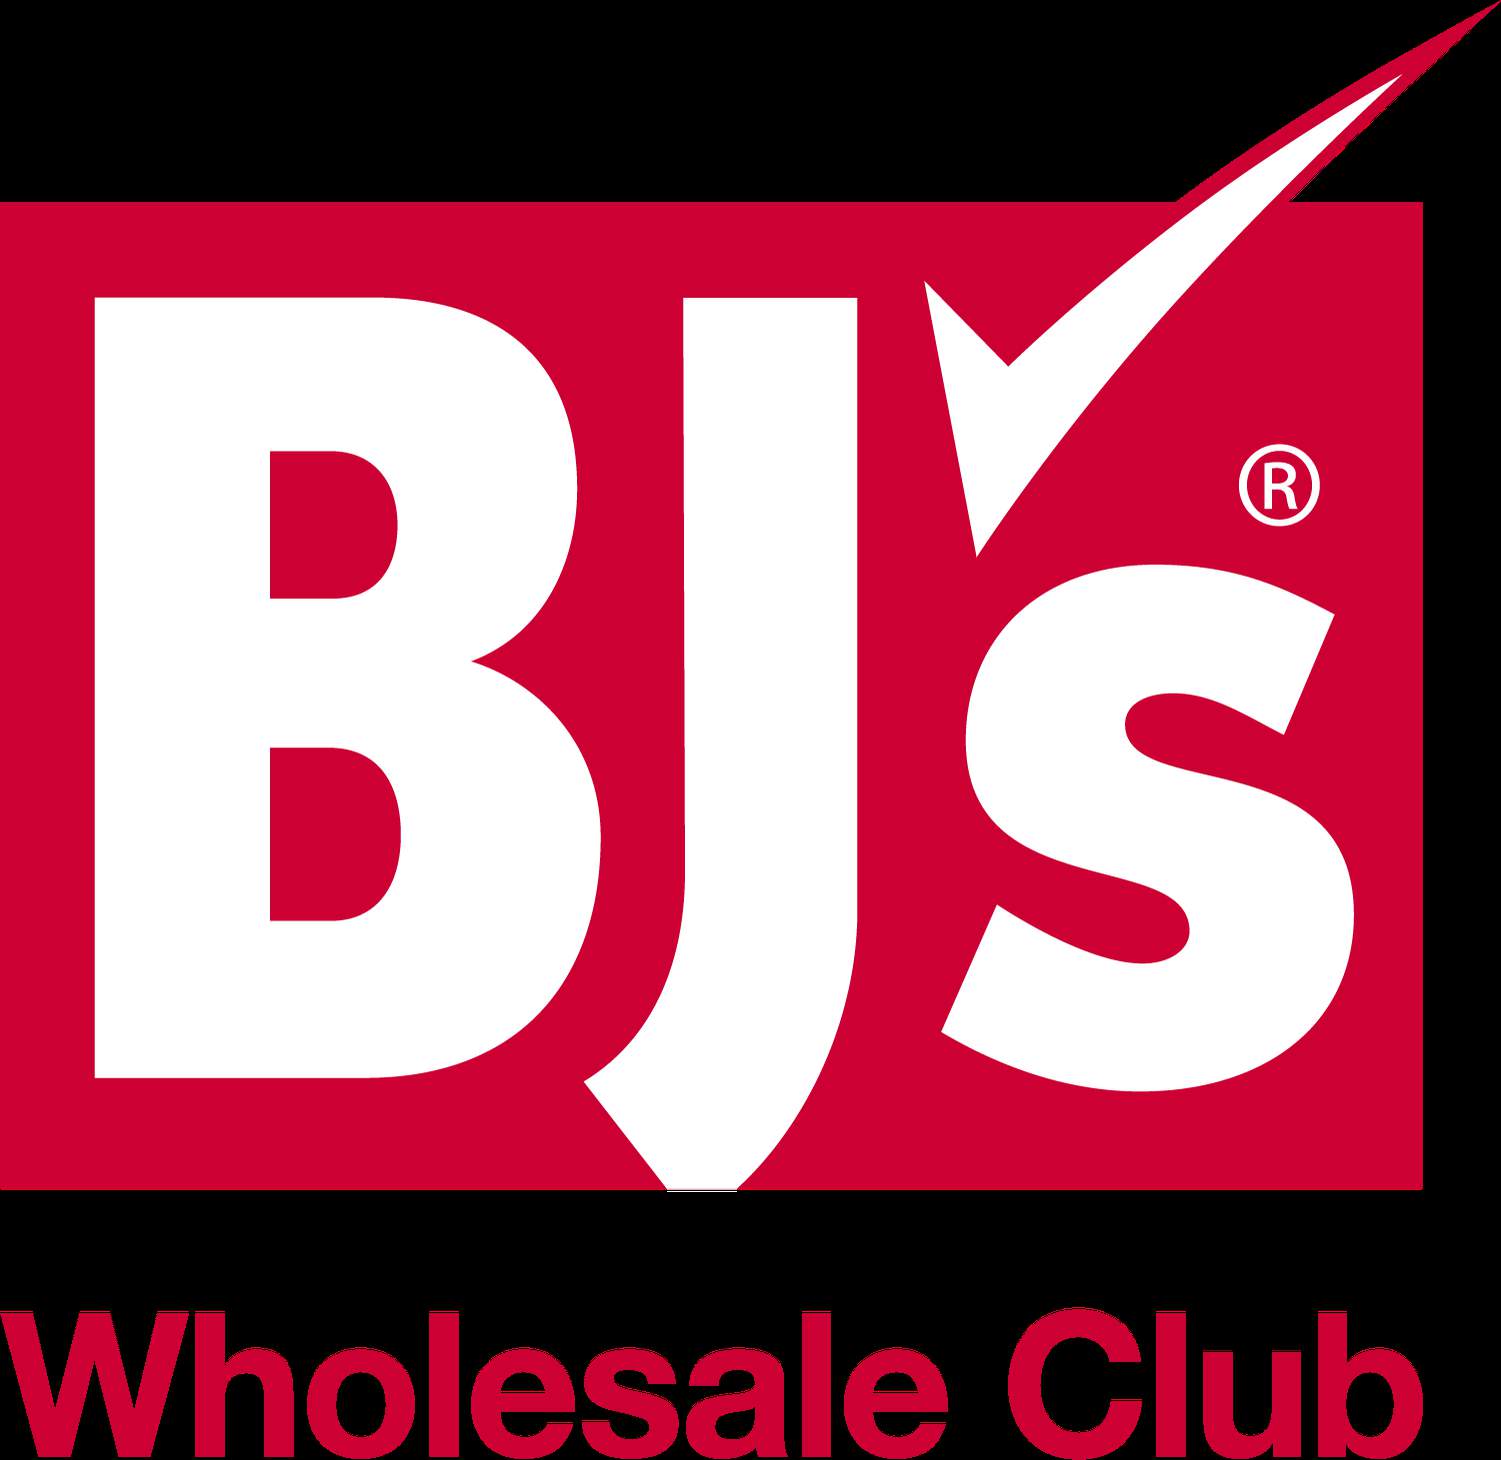 Live In The D Bj S Wholesale Club Giveaway Contest Rules